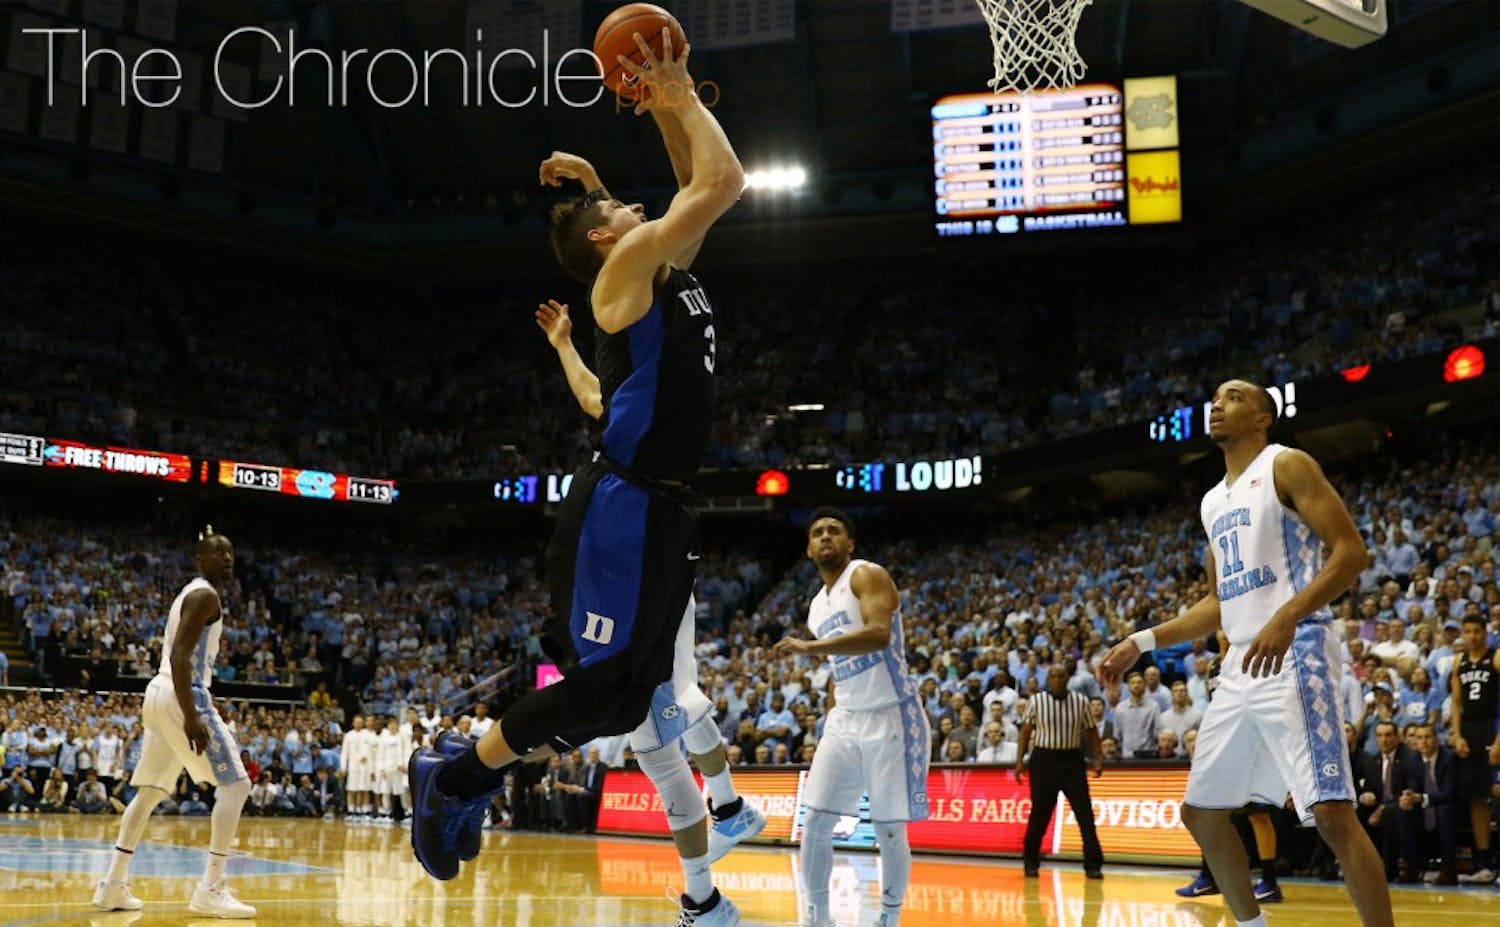 Sophomore Grayson Allen and the Blue Devils took on the role of gritty underdog during a tough four-game ACC stretch.